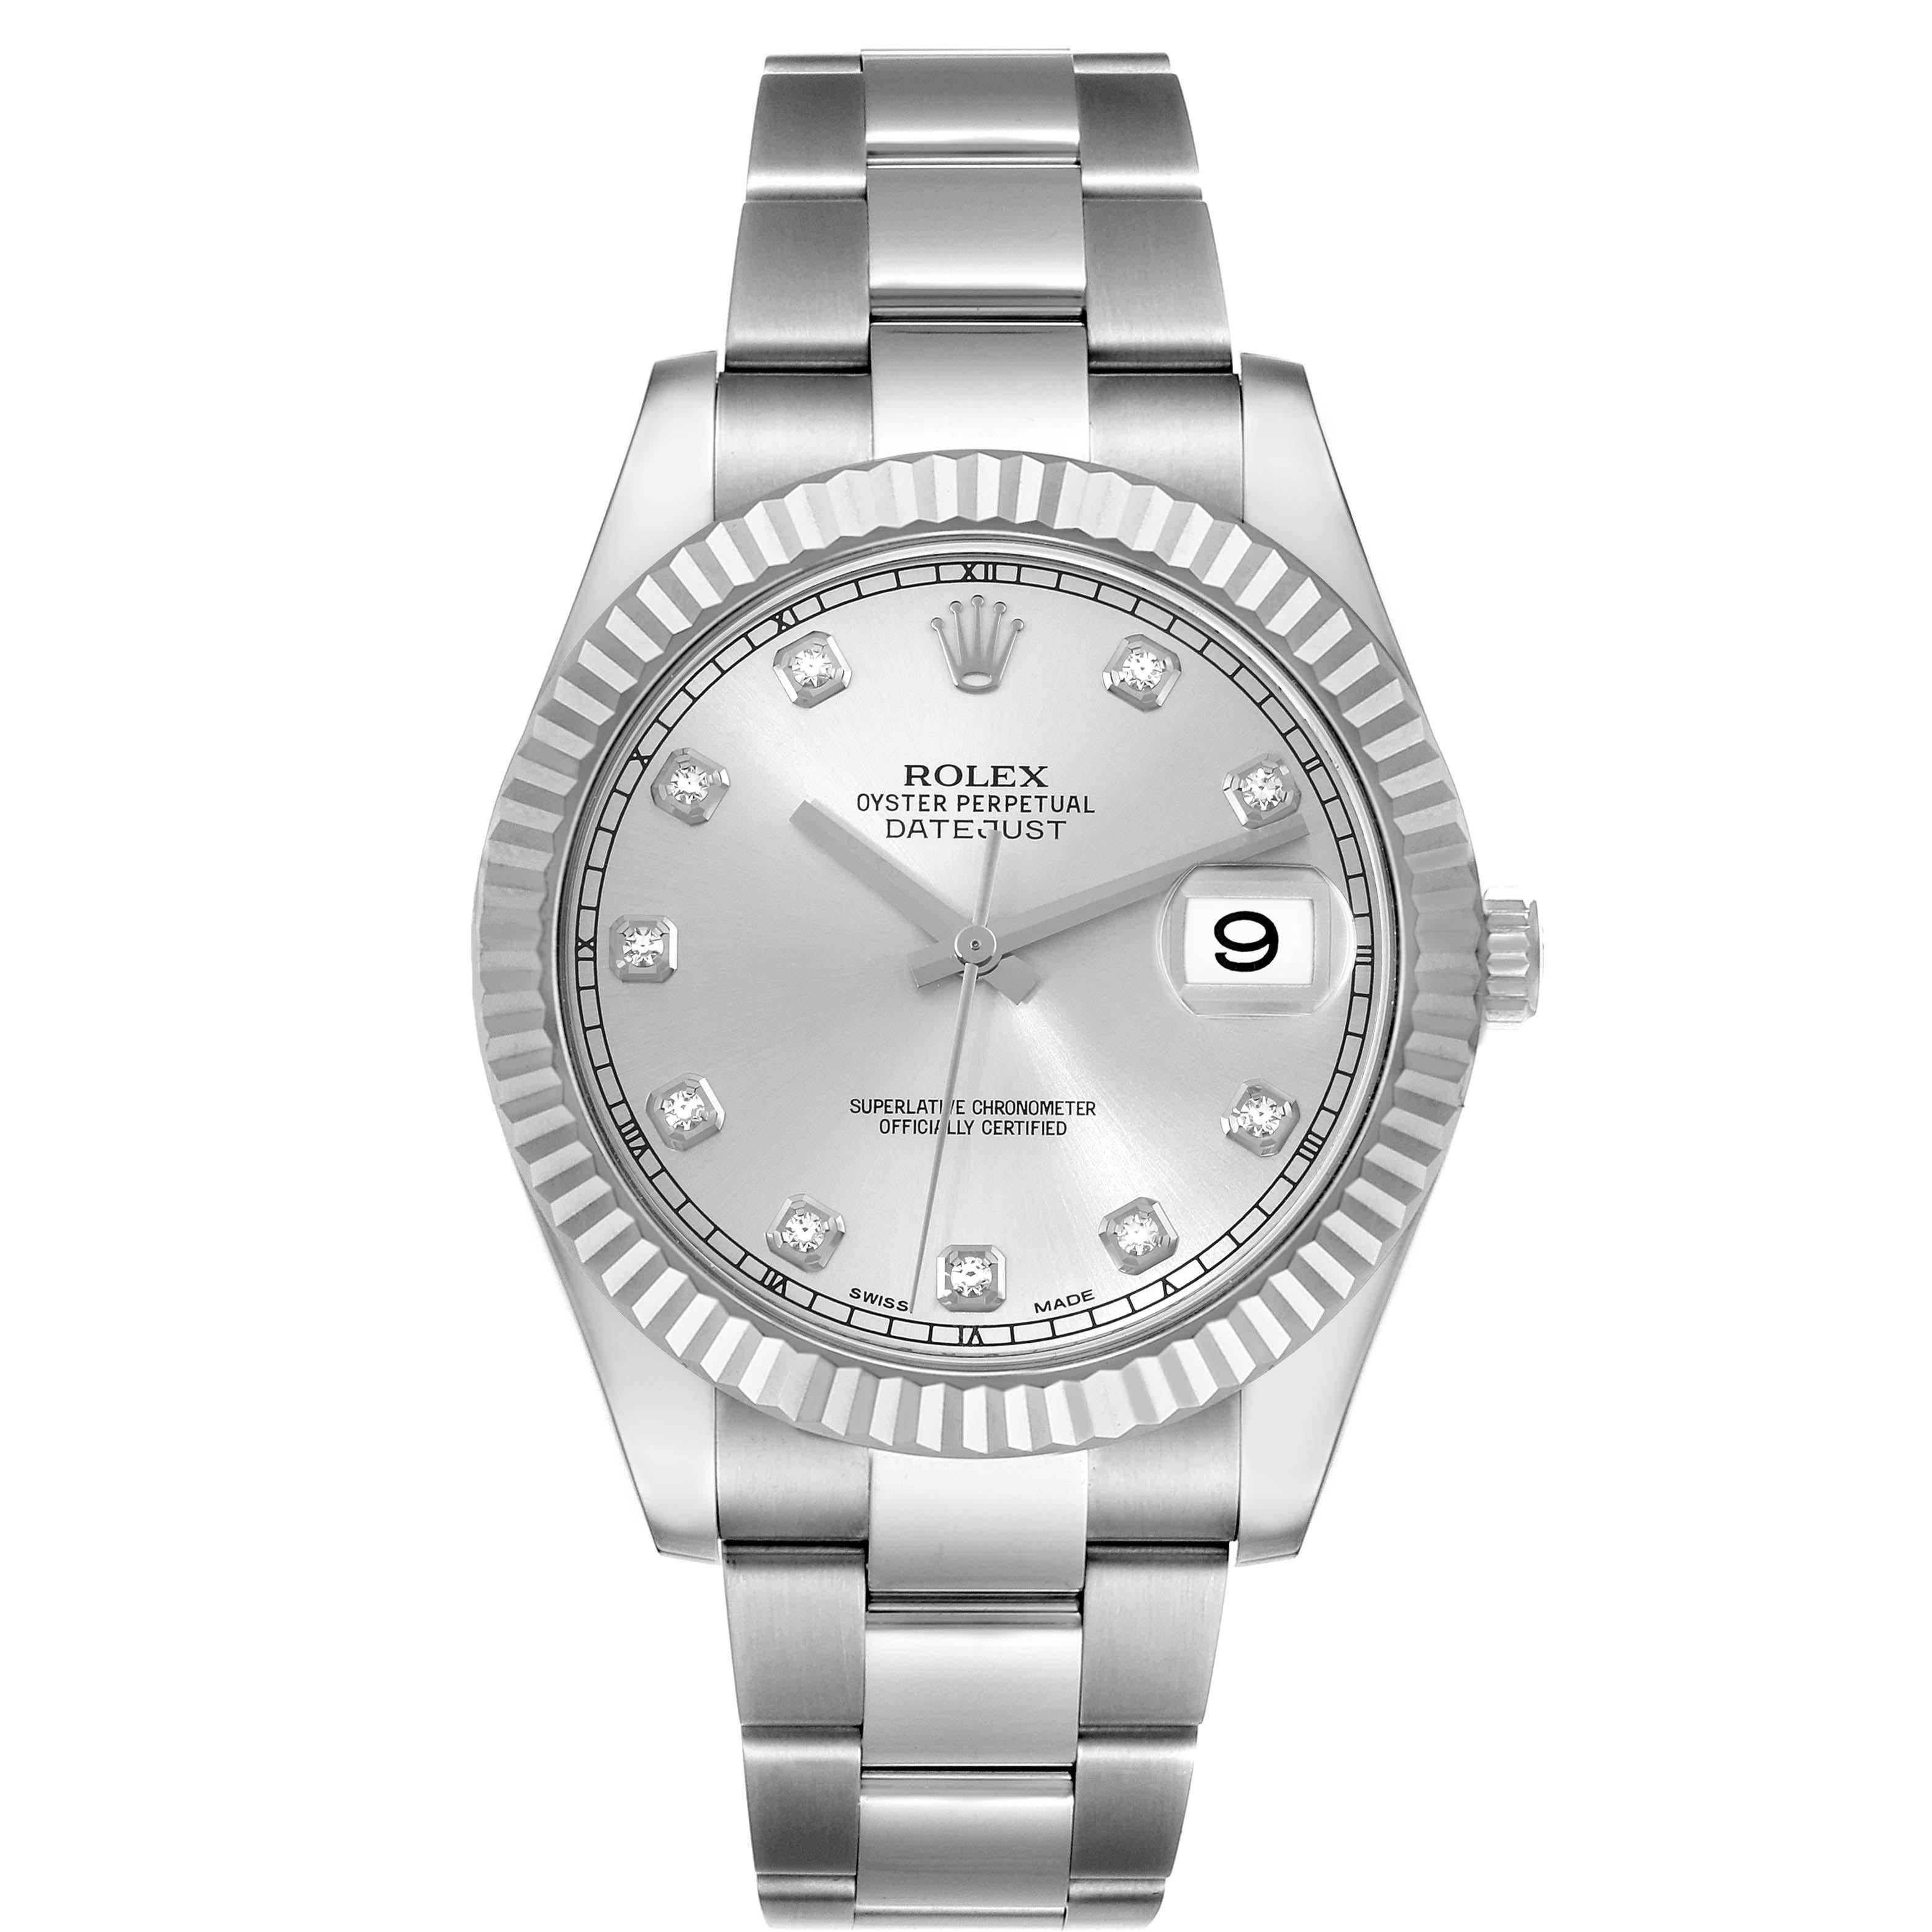 Rolex Datejust II 41 Diamond Dial Steel White Gold Mens Watch 116334 Box Card. Officially certified chronometer automatic self-winding movement. Stainless steel case 41 mm in diameter. Rolex logo on a crown. 18k white gold fluted bezel. Scratch